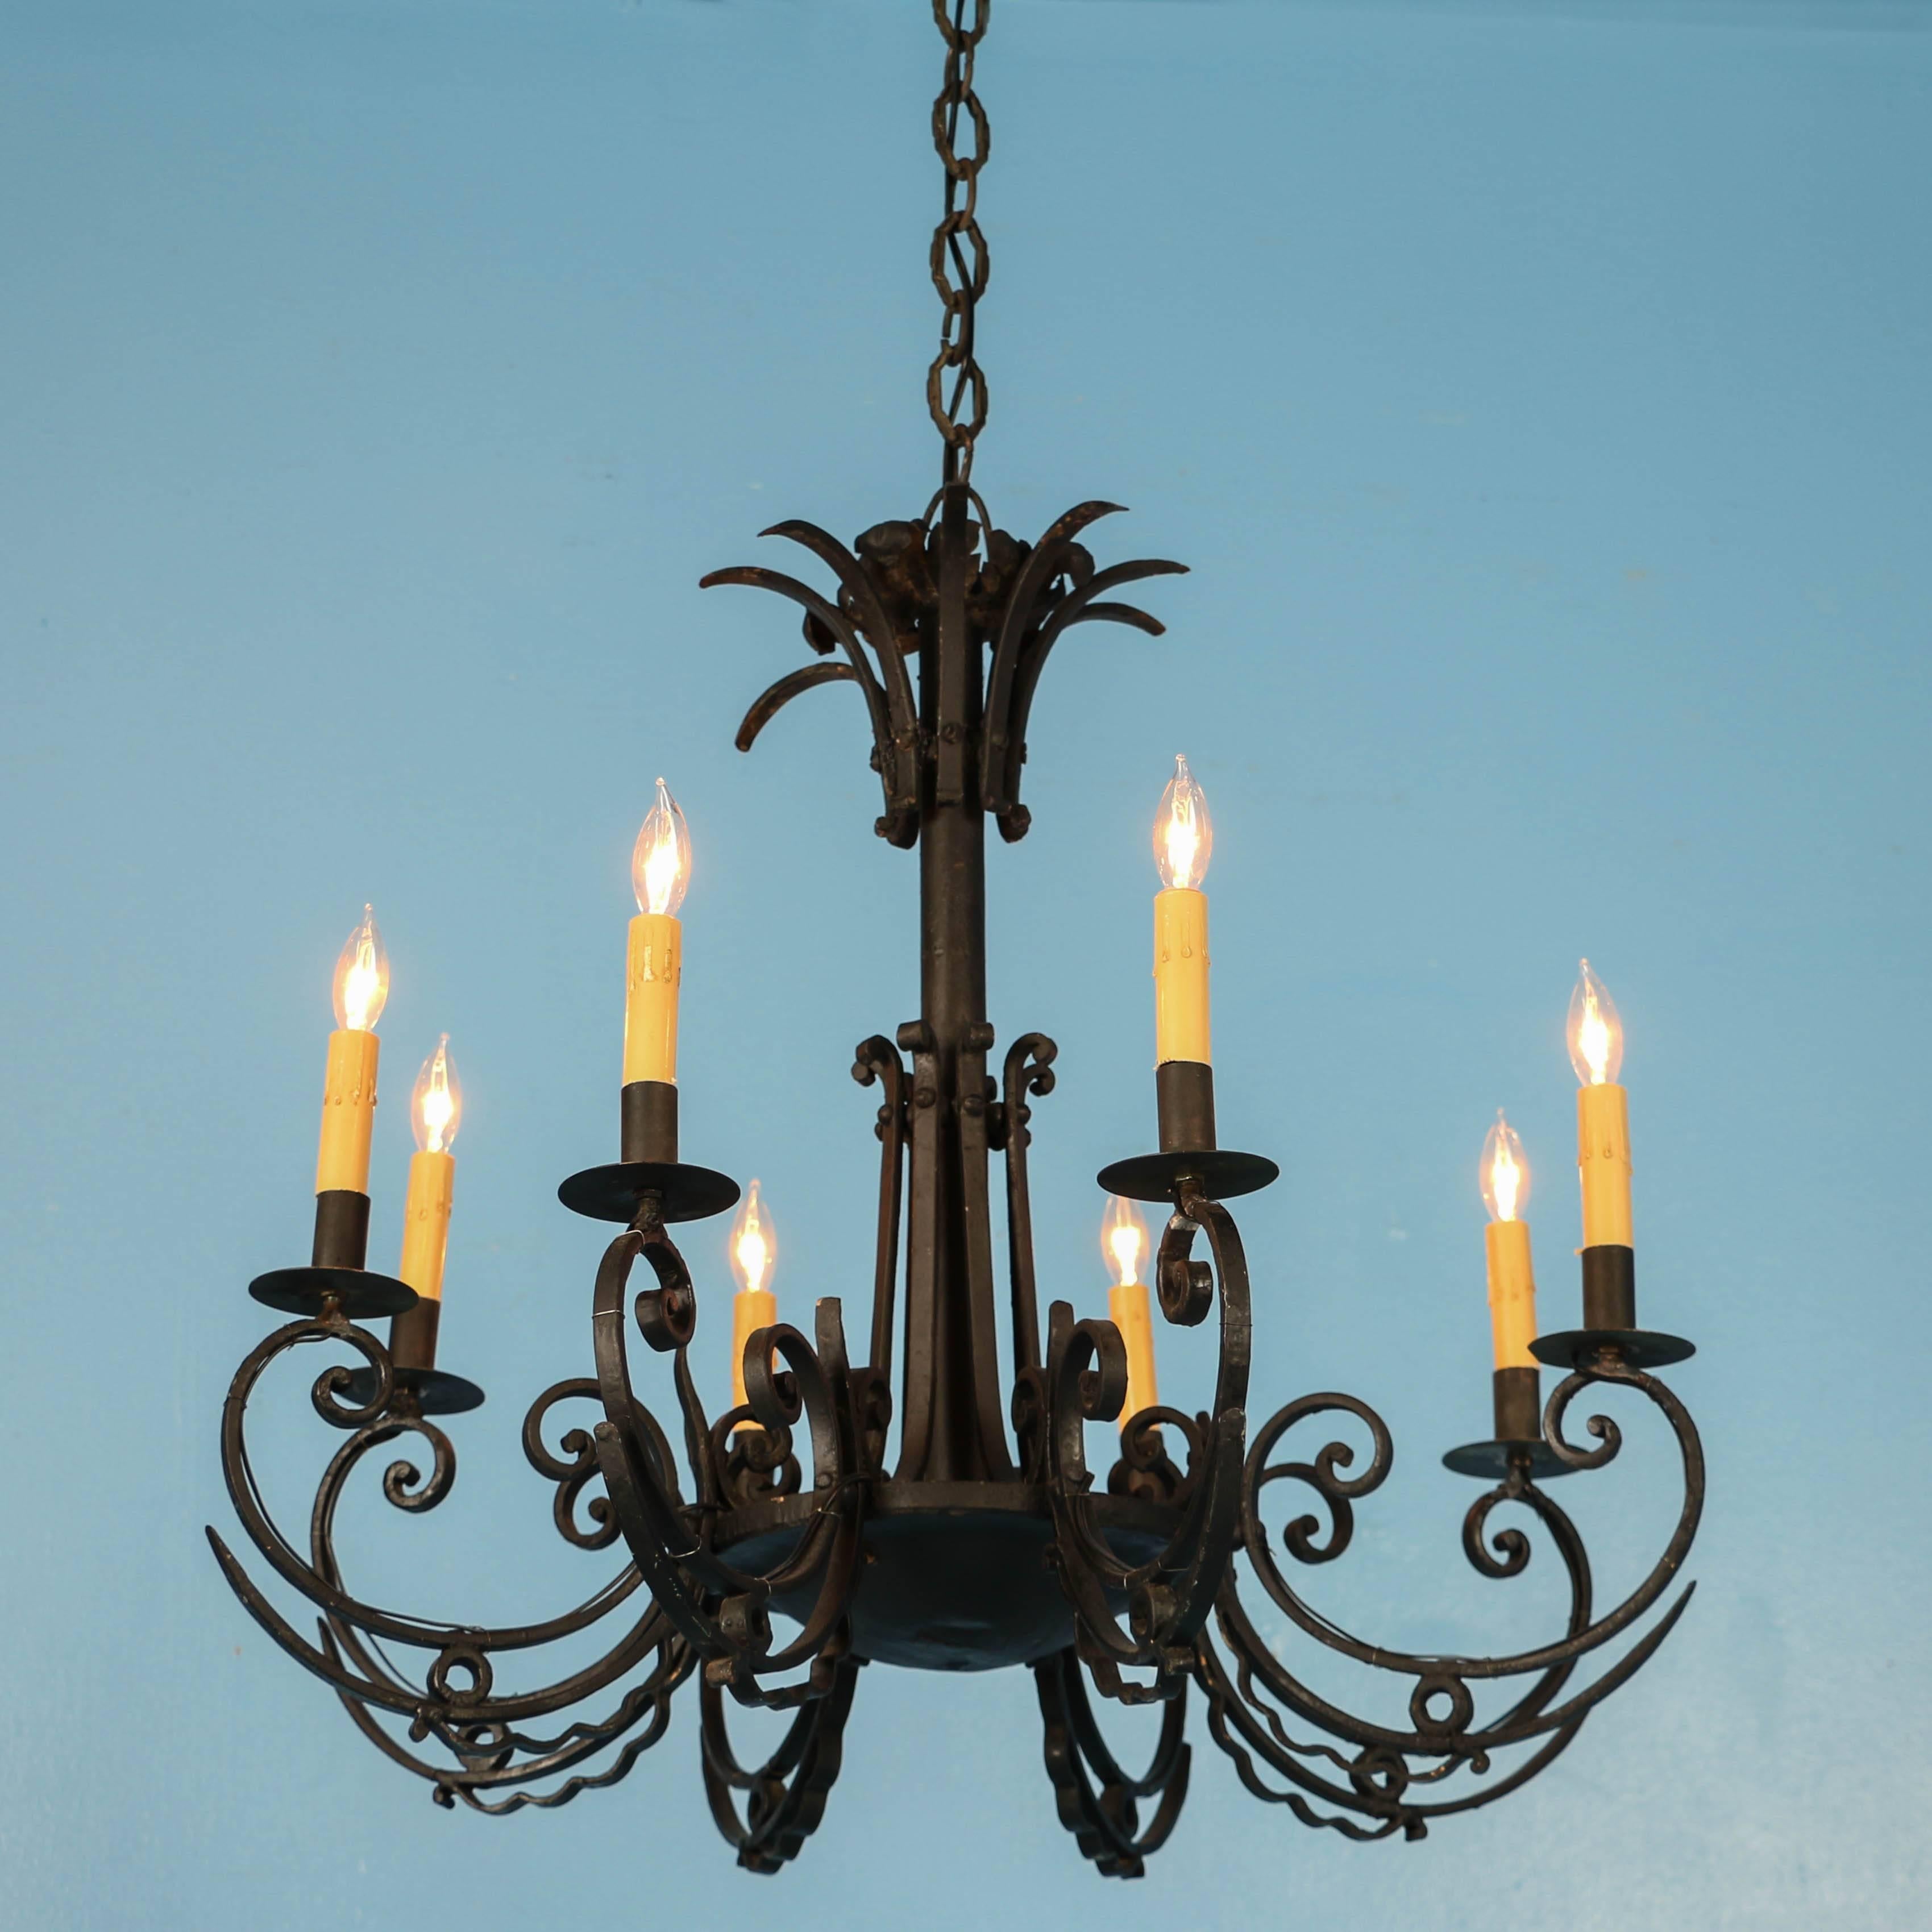 French Antique Eight-Light Scrolled Black Iron Chandelier